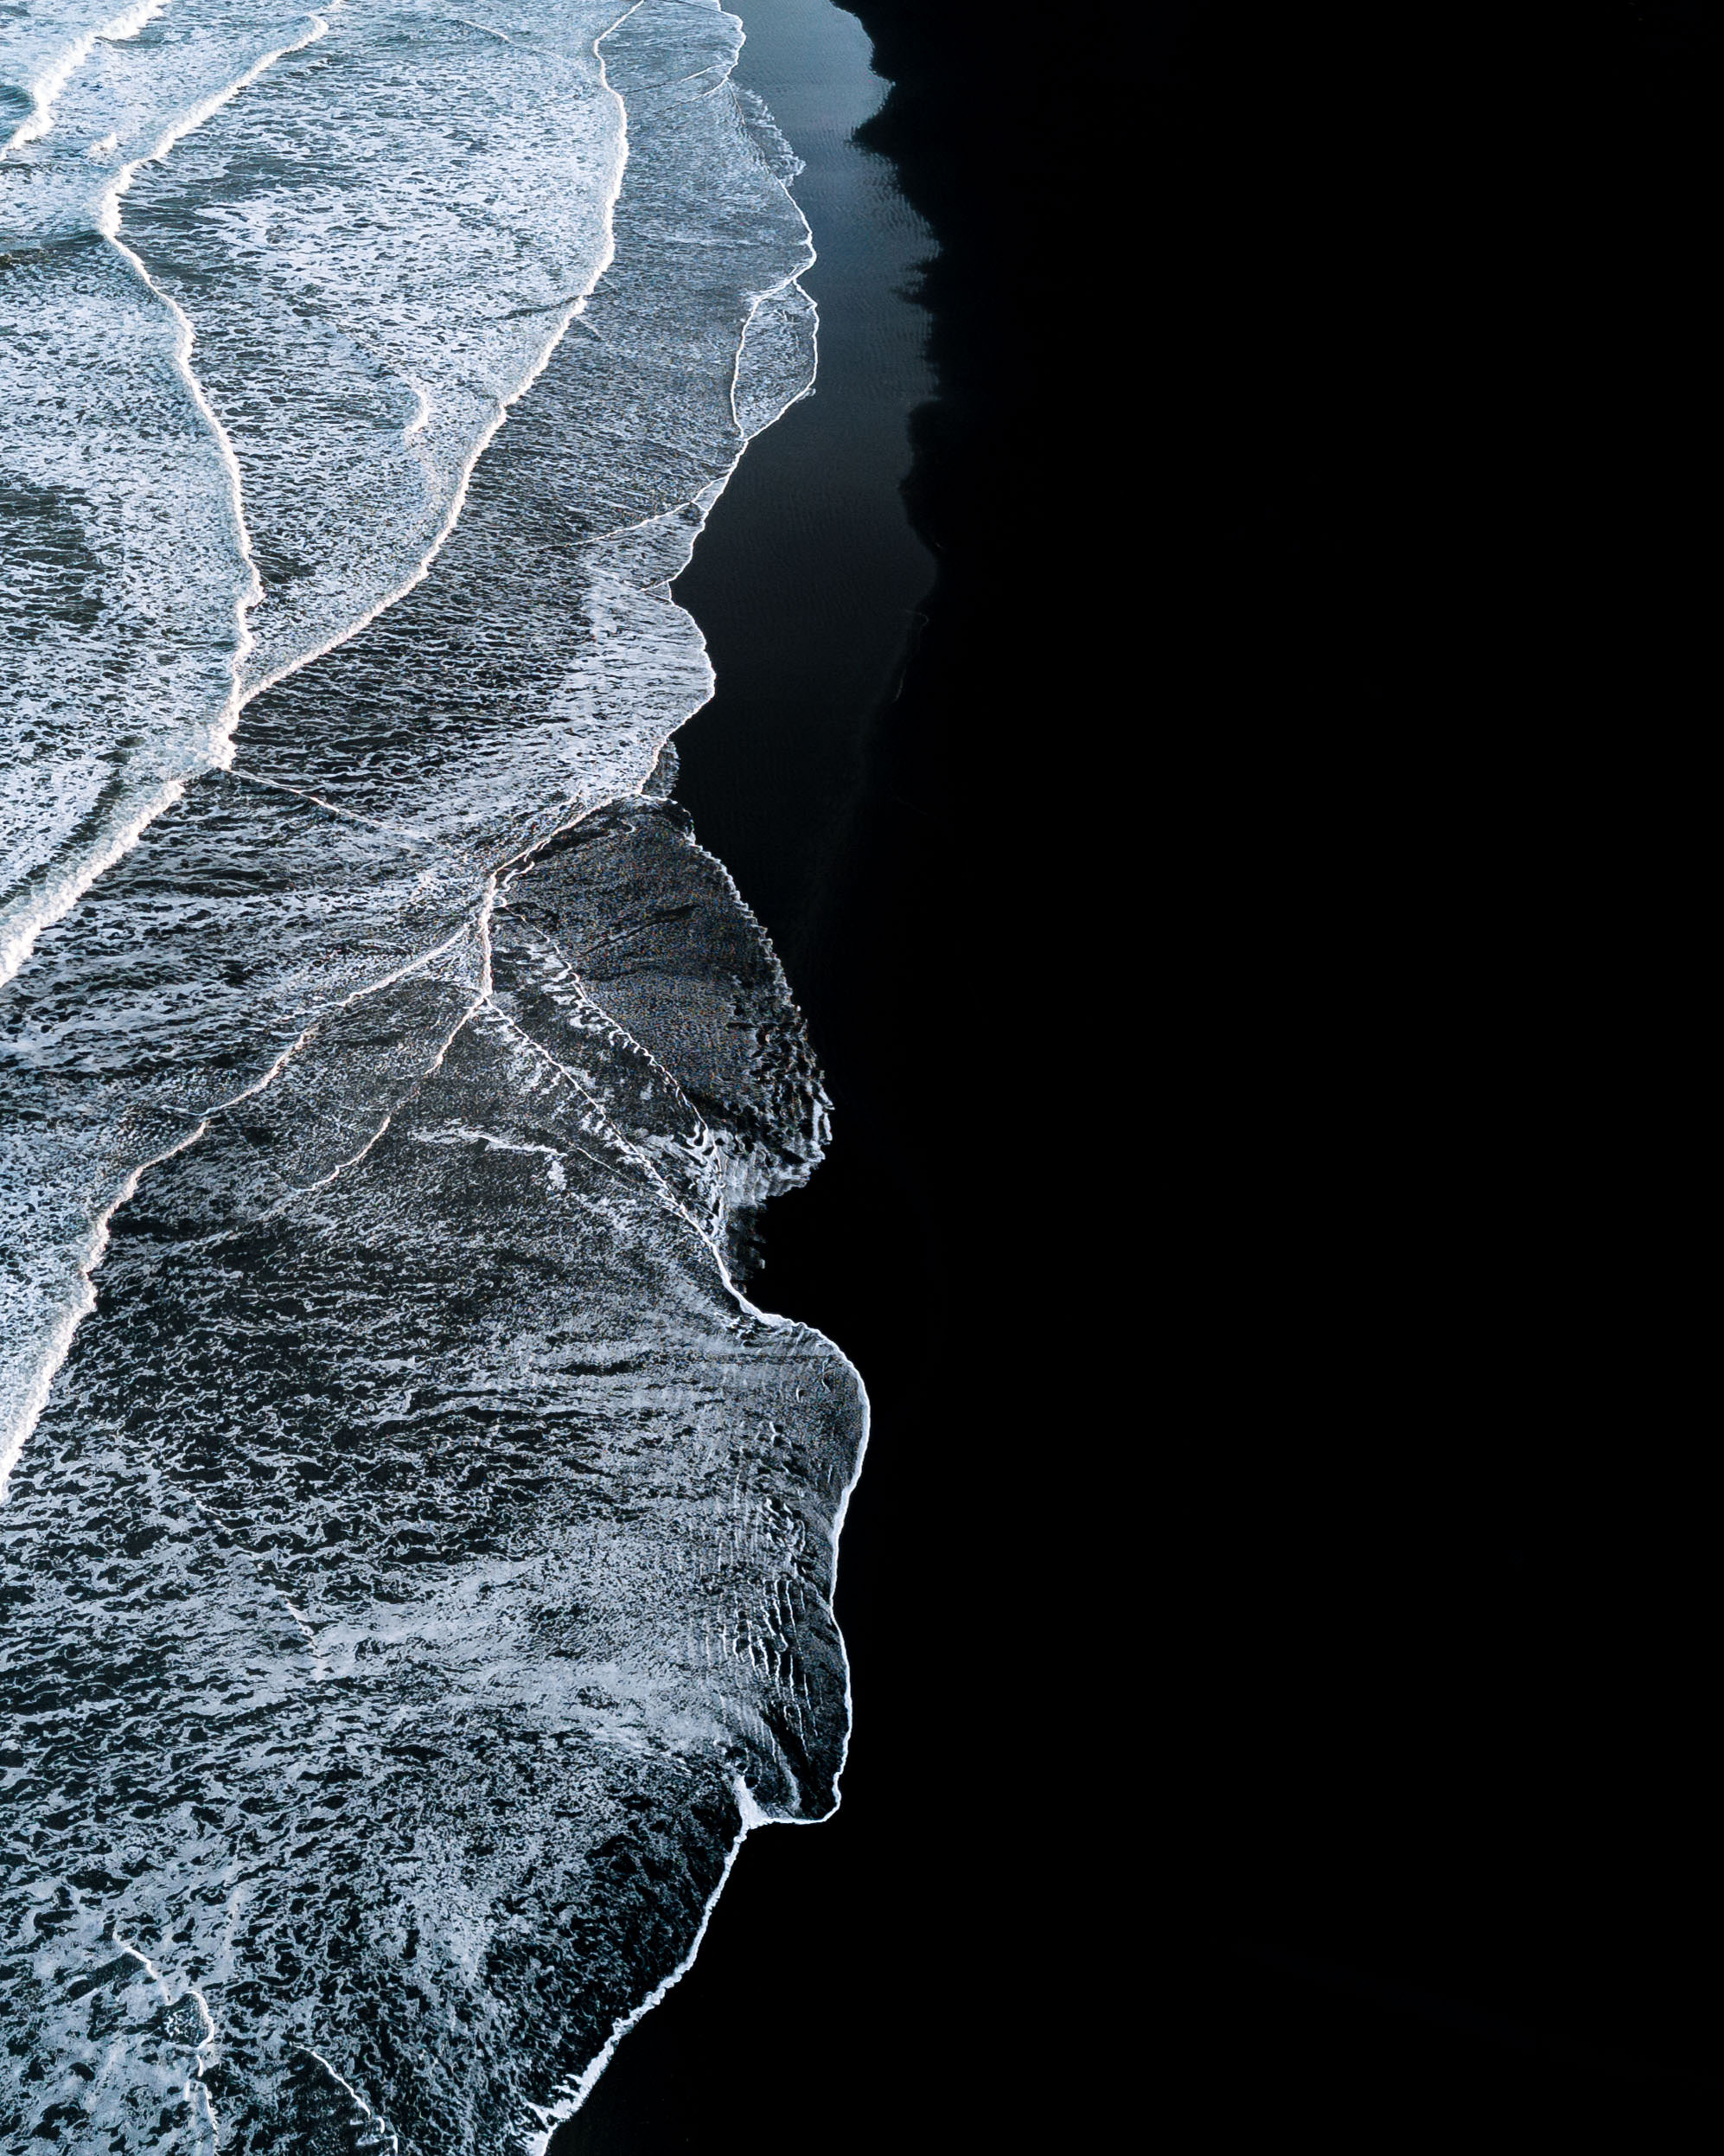 Flow shows different states of water be it solid, flowing or as a cloud. Captured in the wild Icelandic landscape often with a drone by photographer Michael Schauer